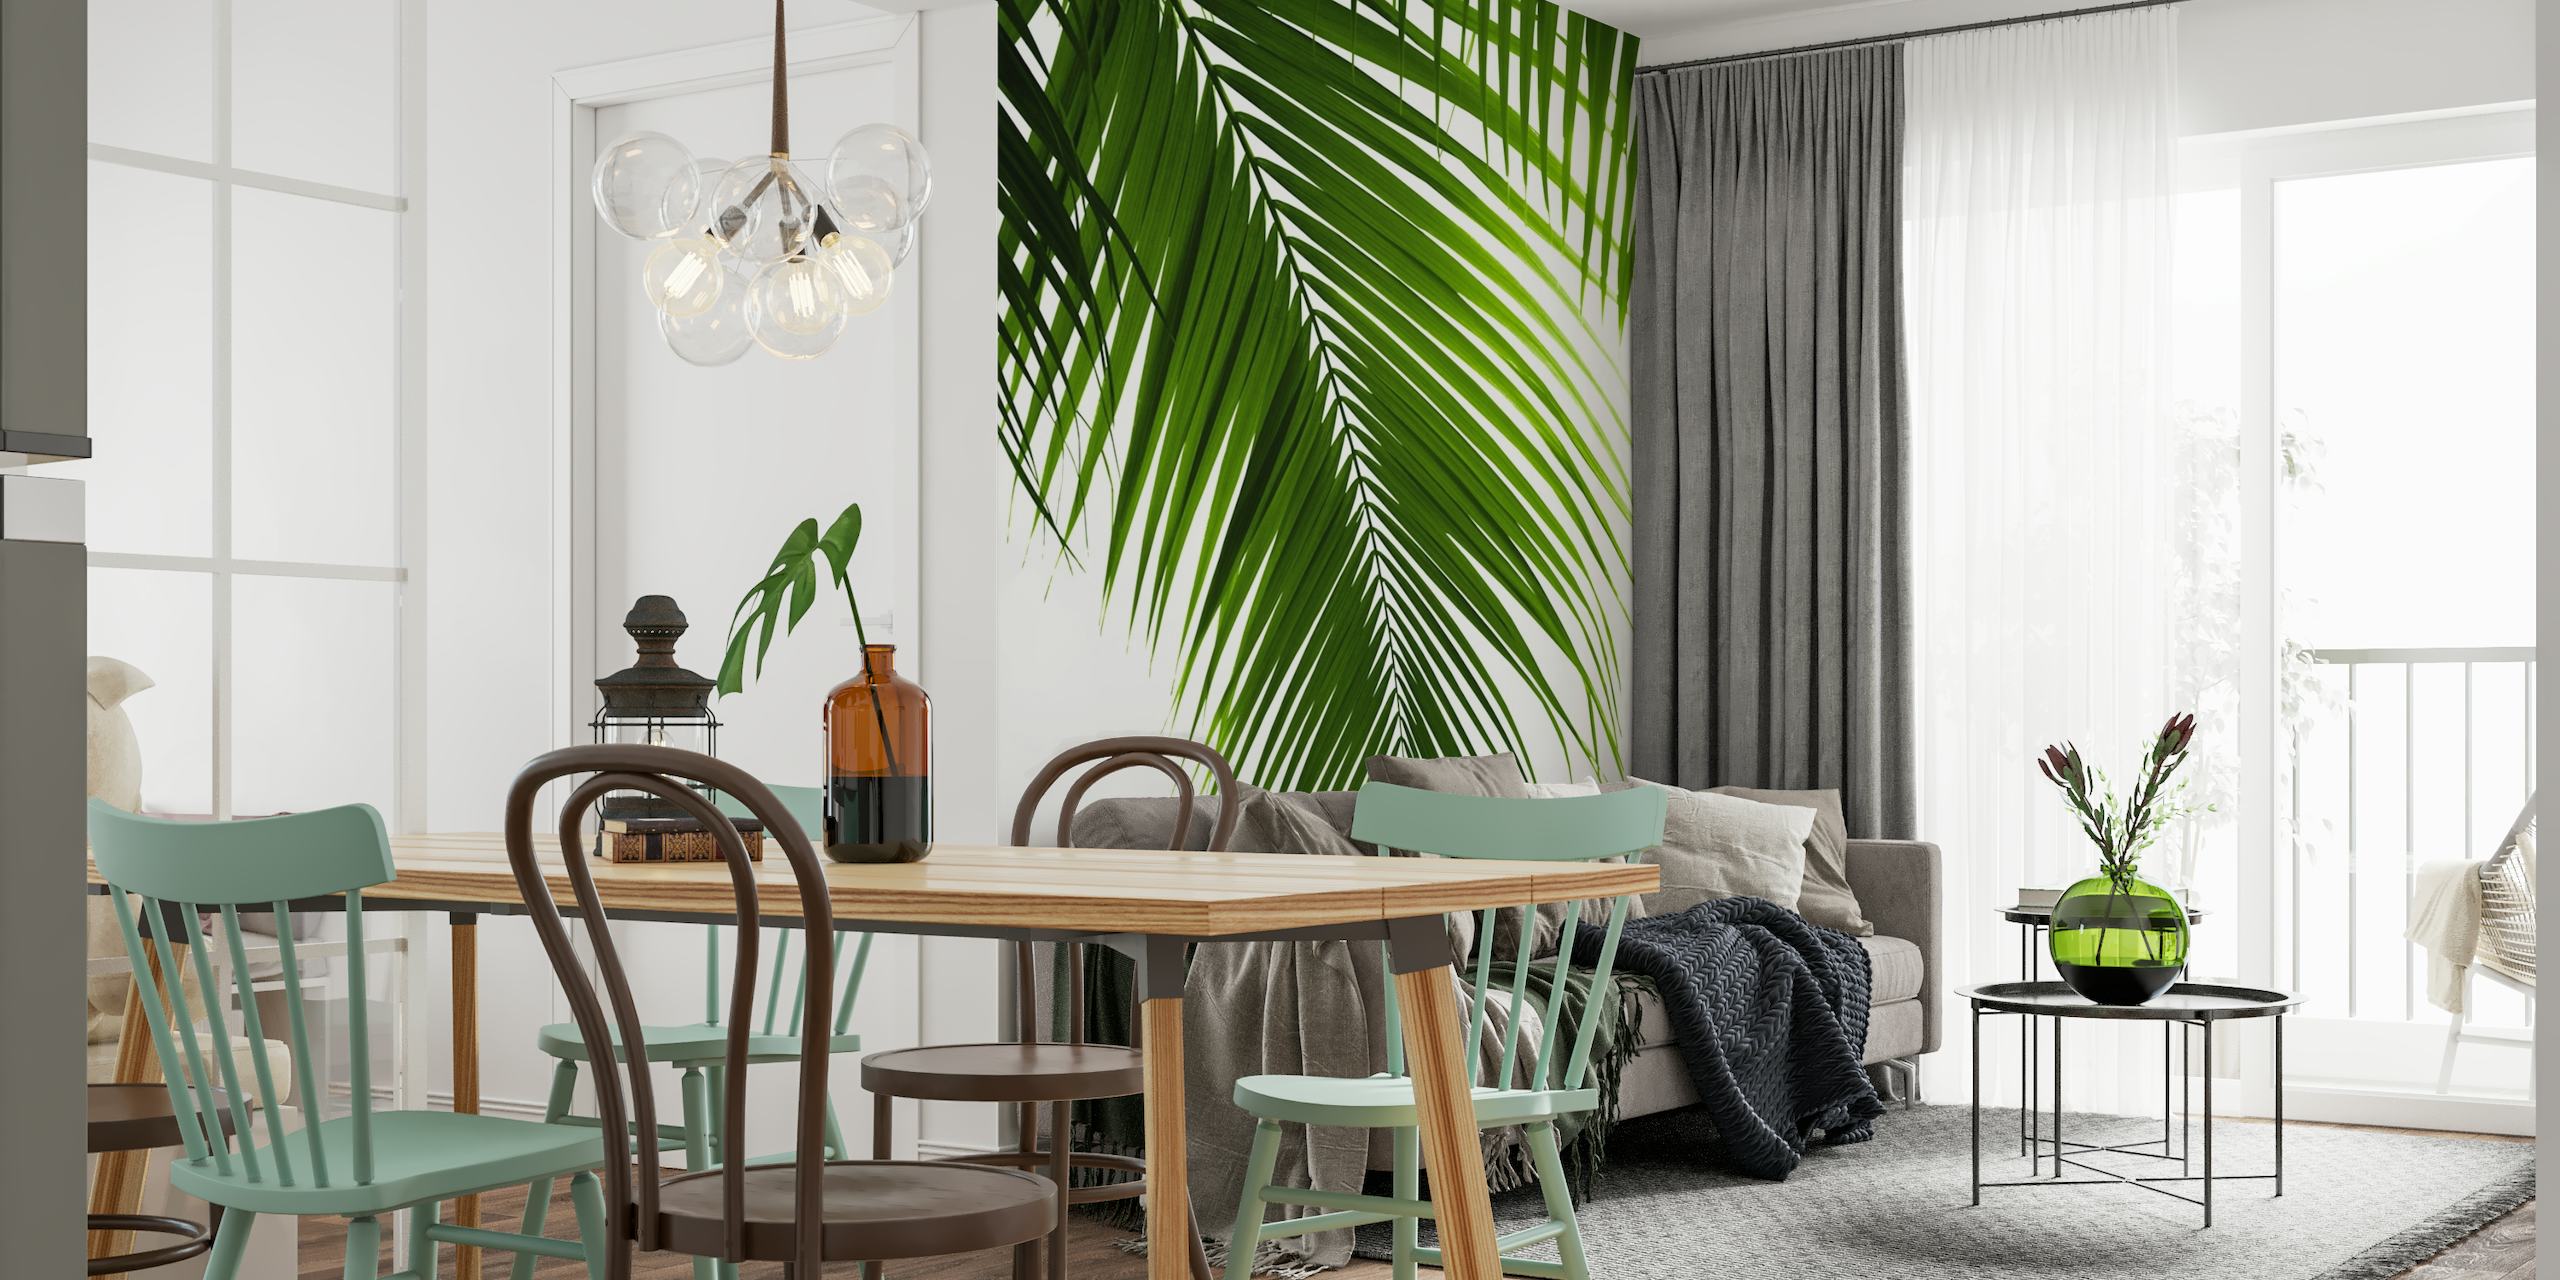 Palm Leaves Green Vibes 10 behang